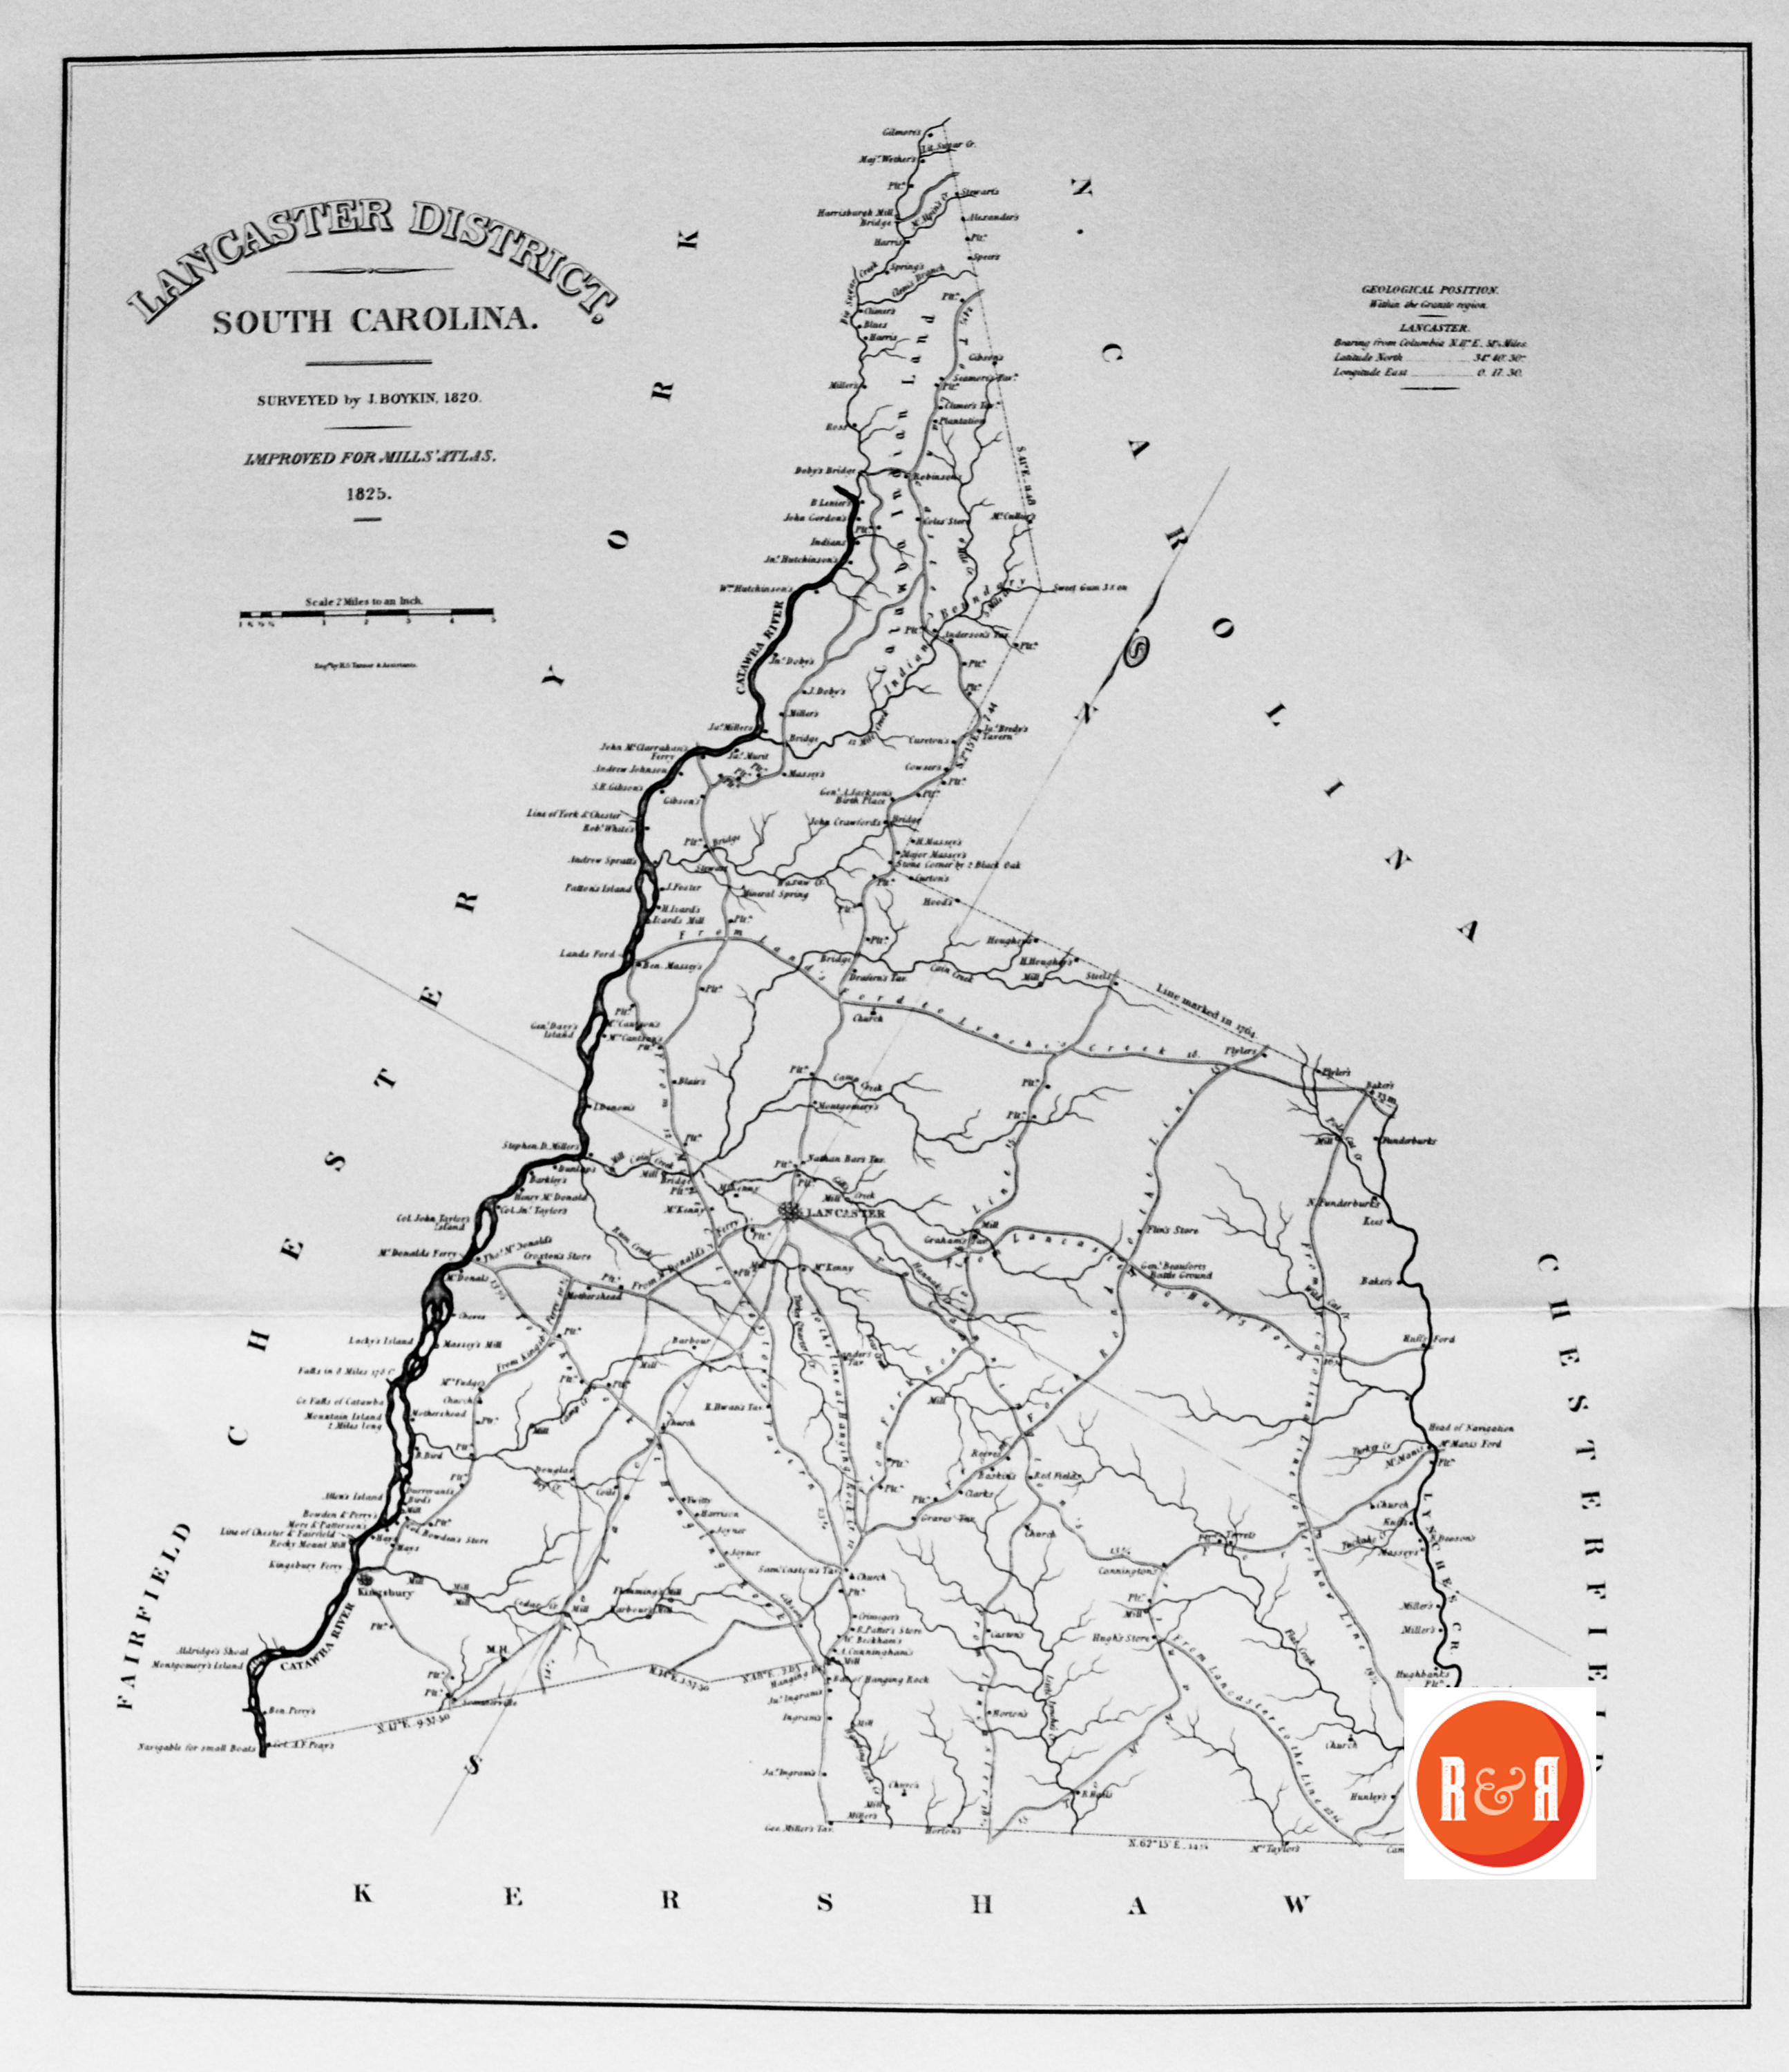 OVERALL LANCASTER CO MAP